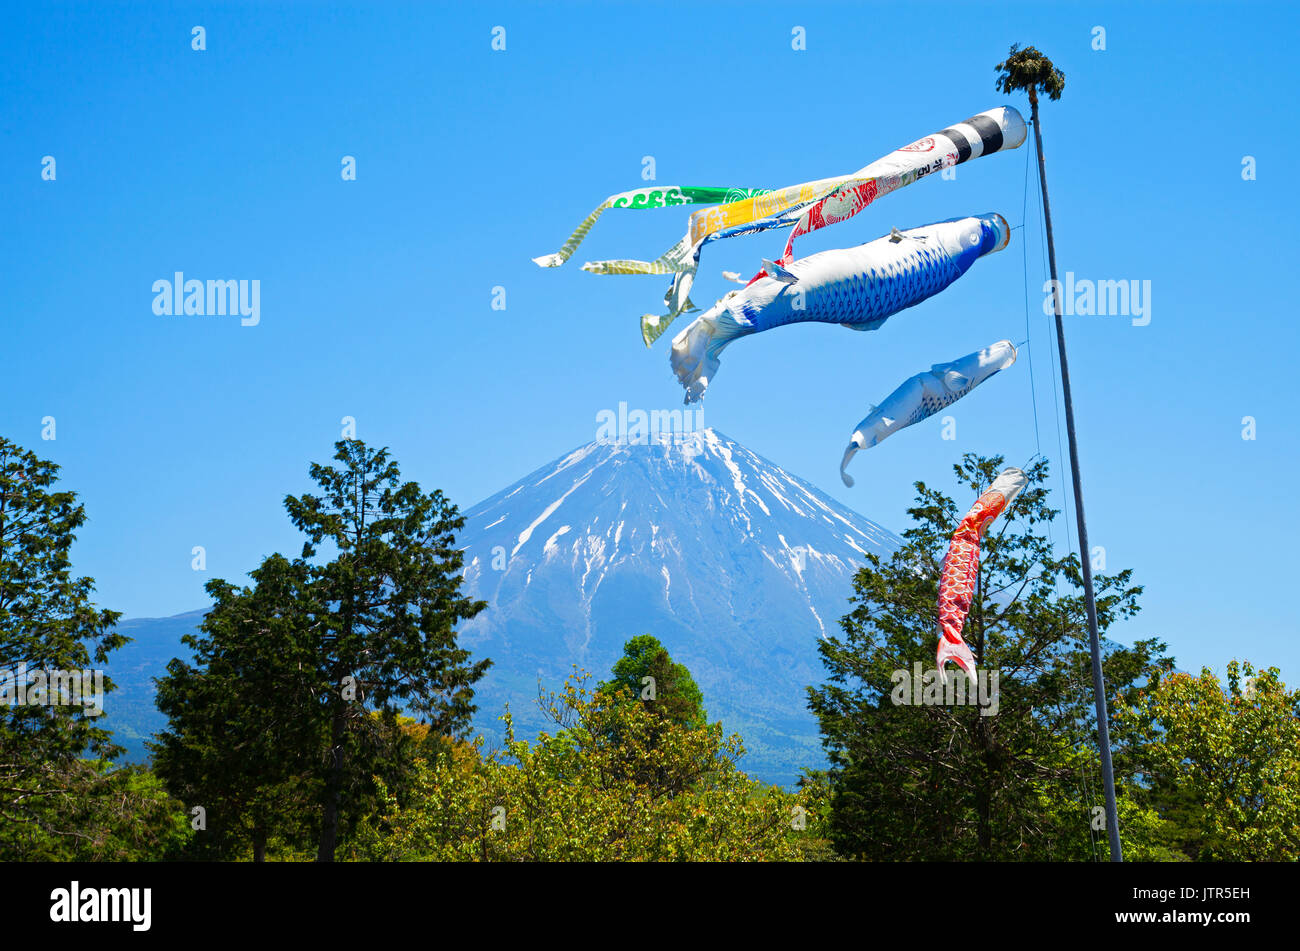 Colourful Koinobori Carp Kites against a clear blue sky at the Asagiri Highlands with Mt. Fuji in the background in Japan Stock Photo